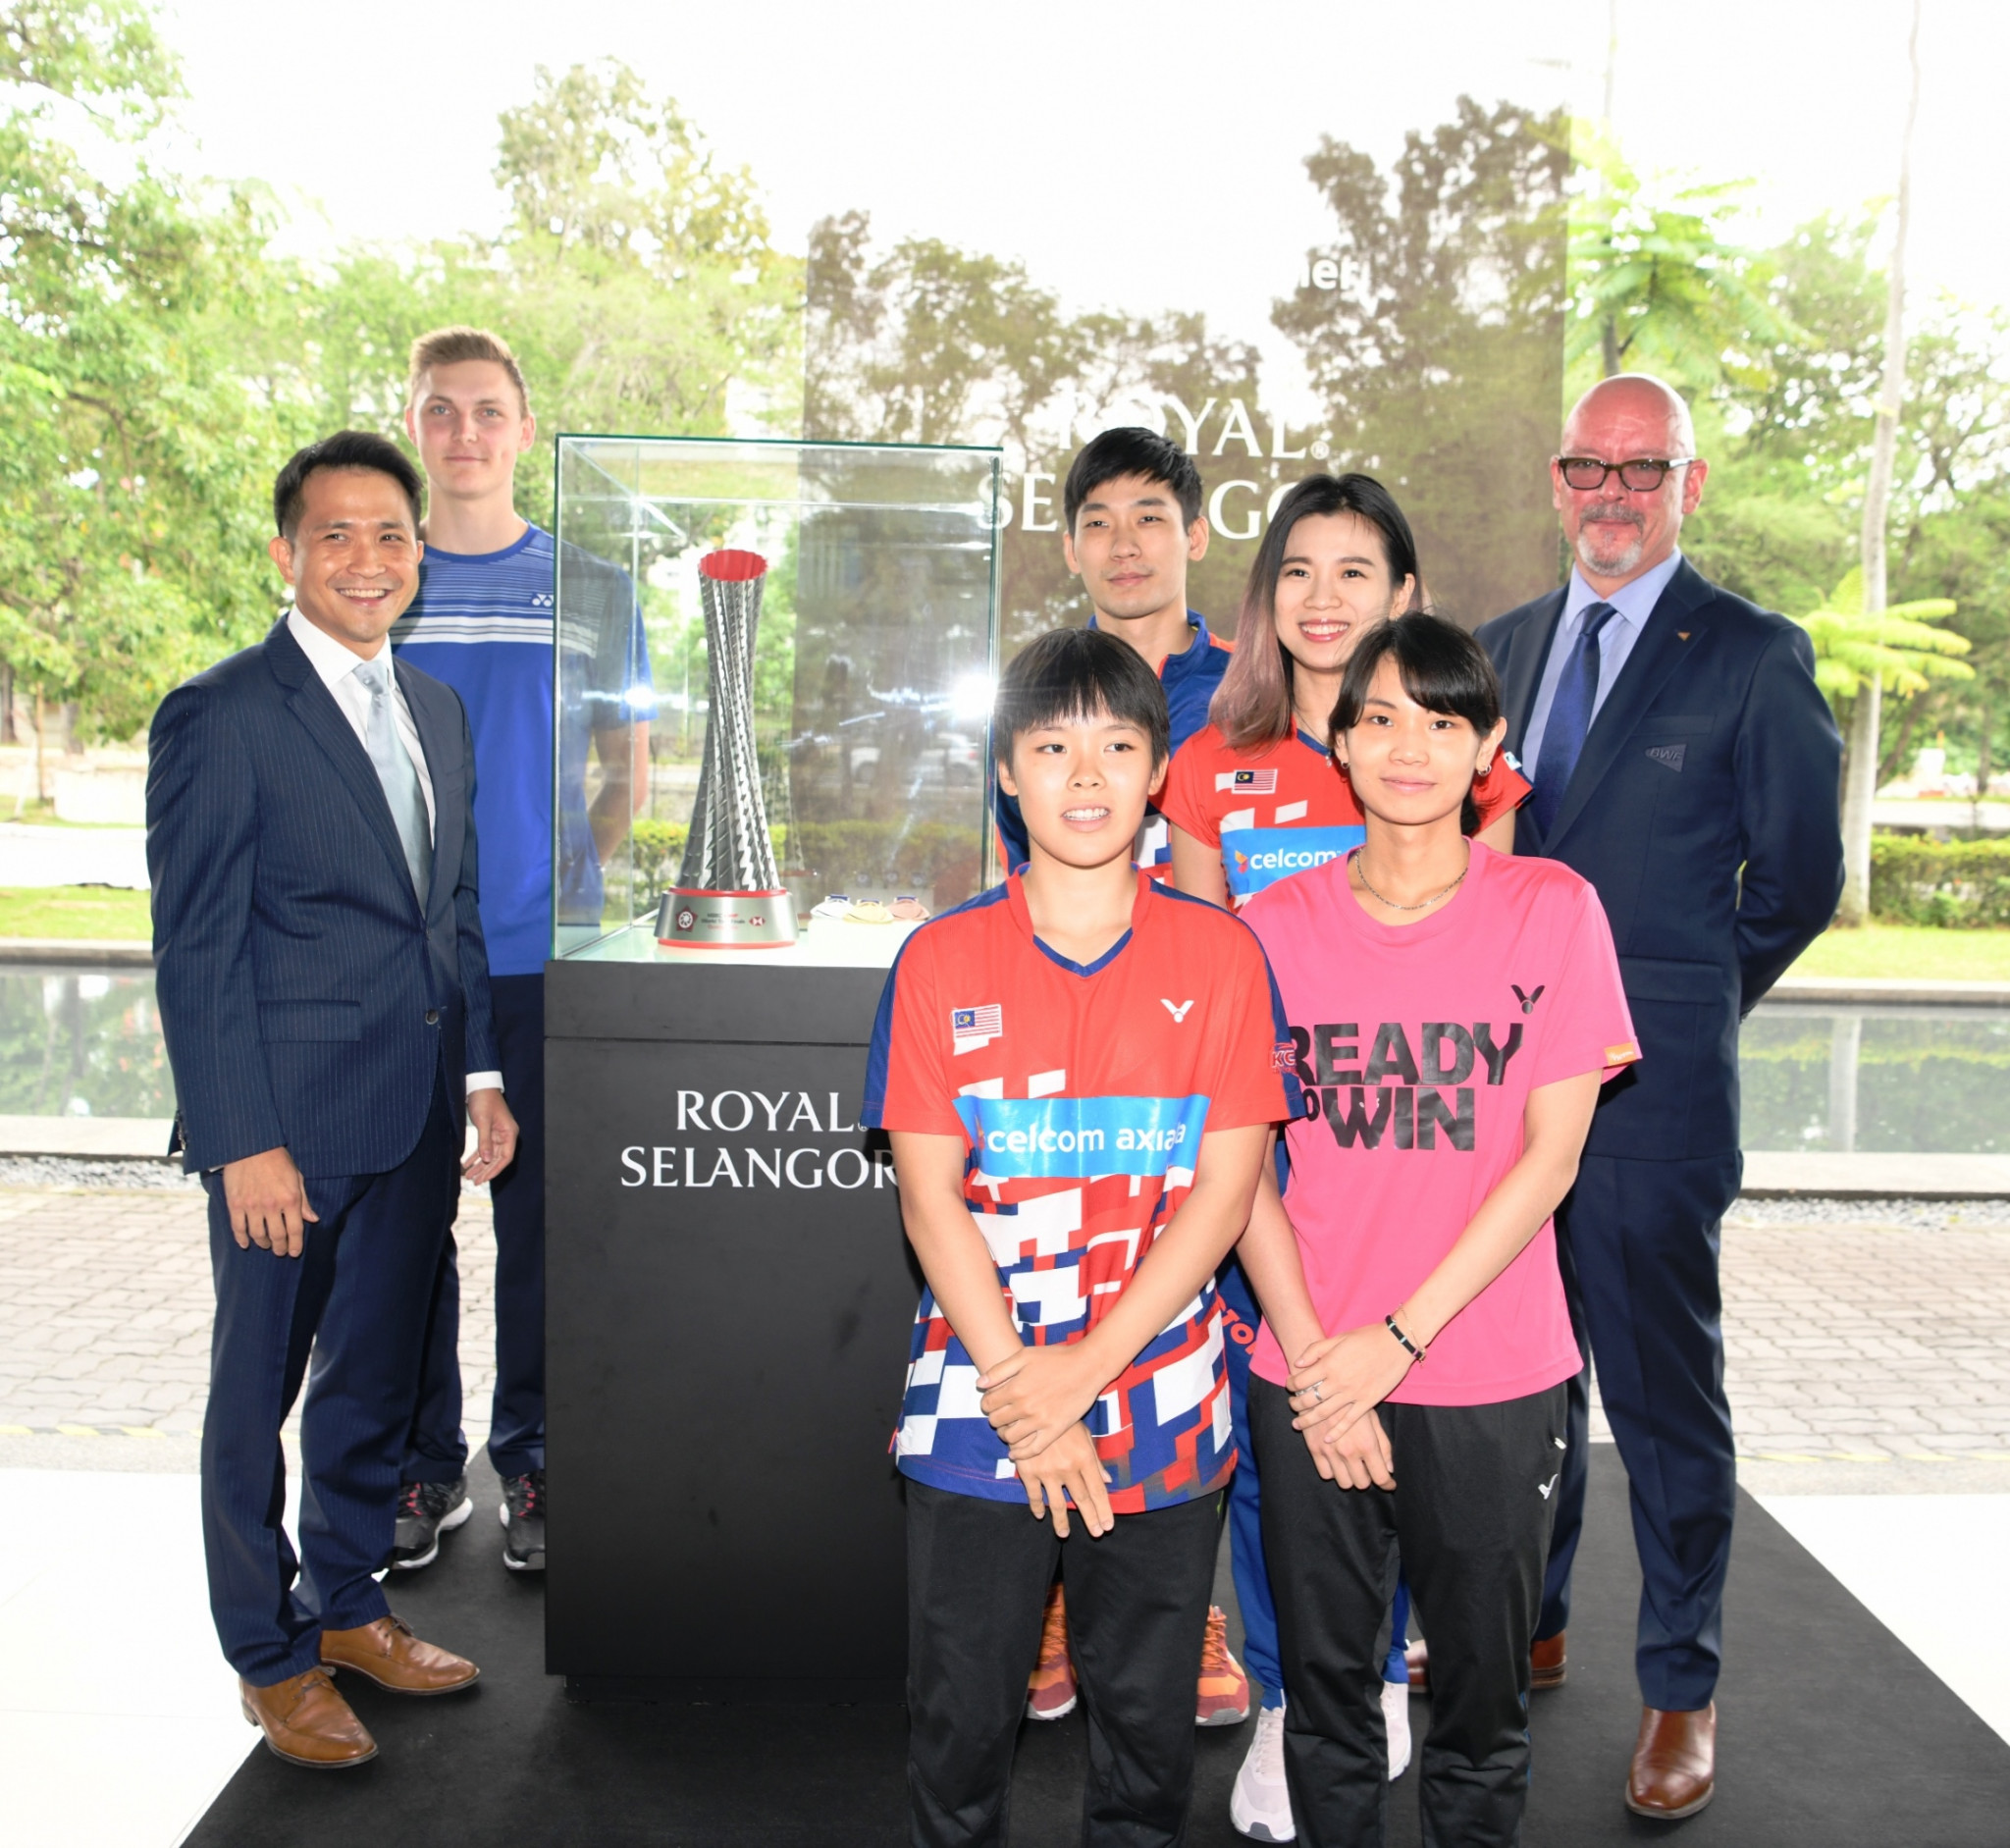 Malaysian pewter manufacturer and retailer Royal Selangor has been named as the official trophy partner of the event ©BWF